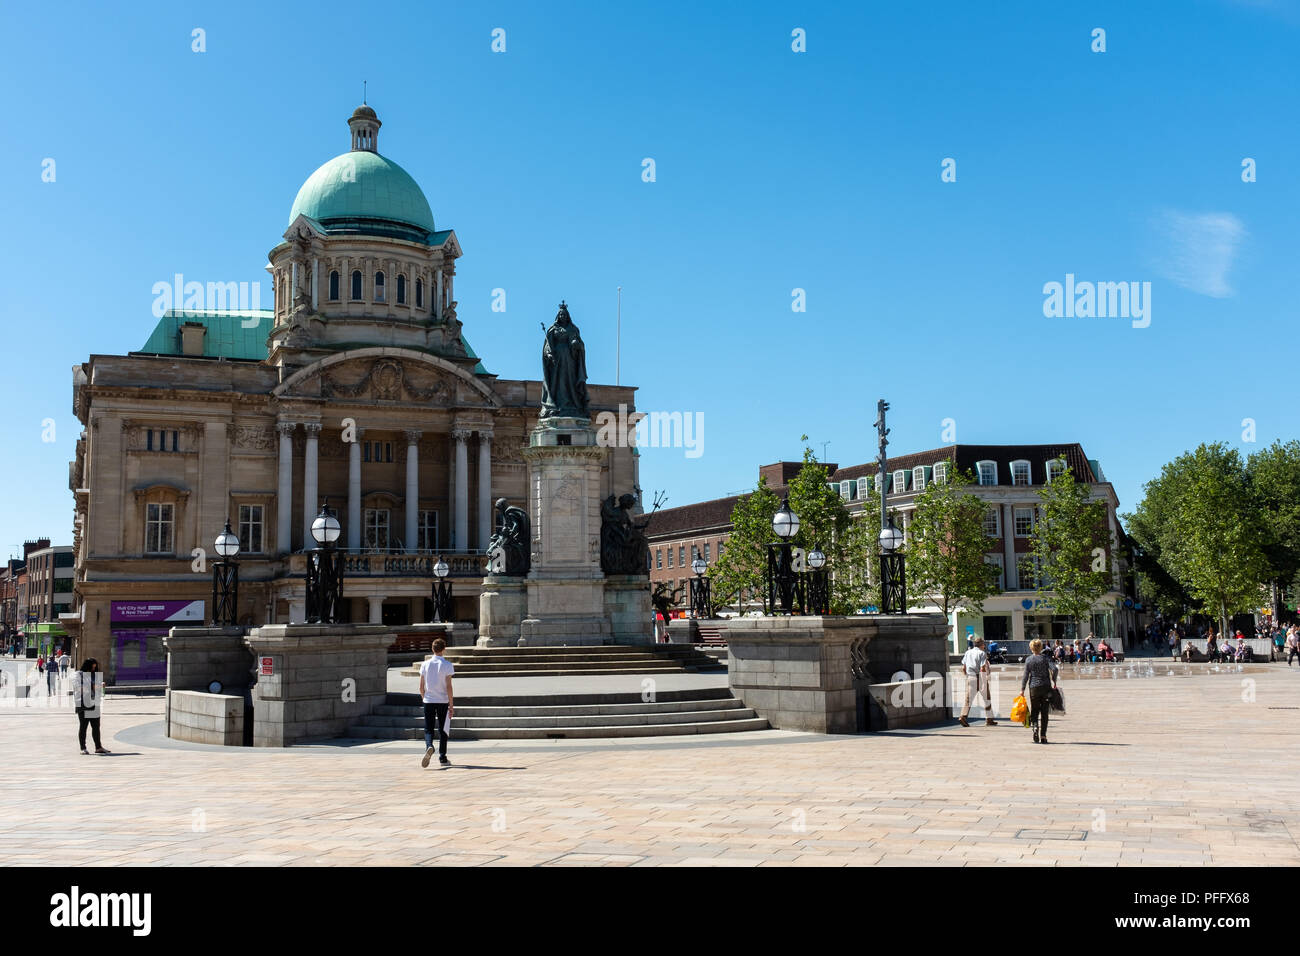 Image of Kingston Upon Hull UK City of Culture 2017. Hull City Hall against a blue sky in summer. Queen Victoria Square with people passing through. Stock Photo